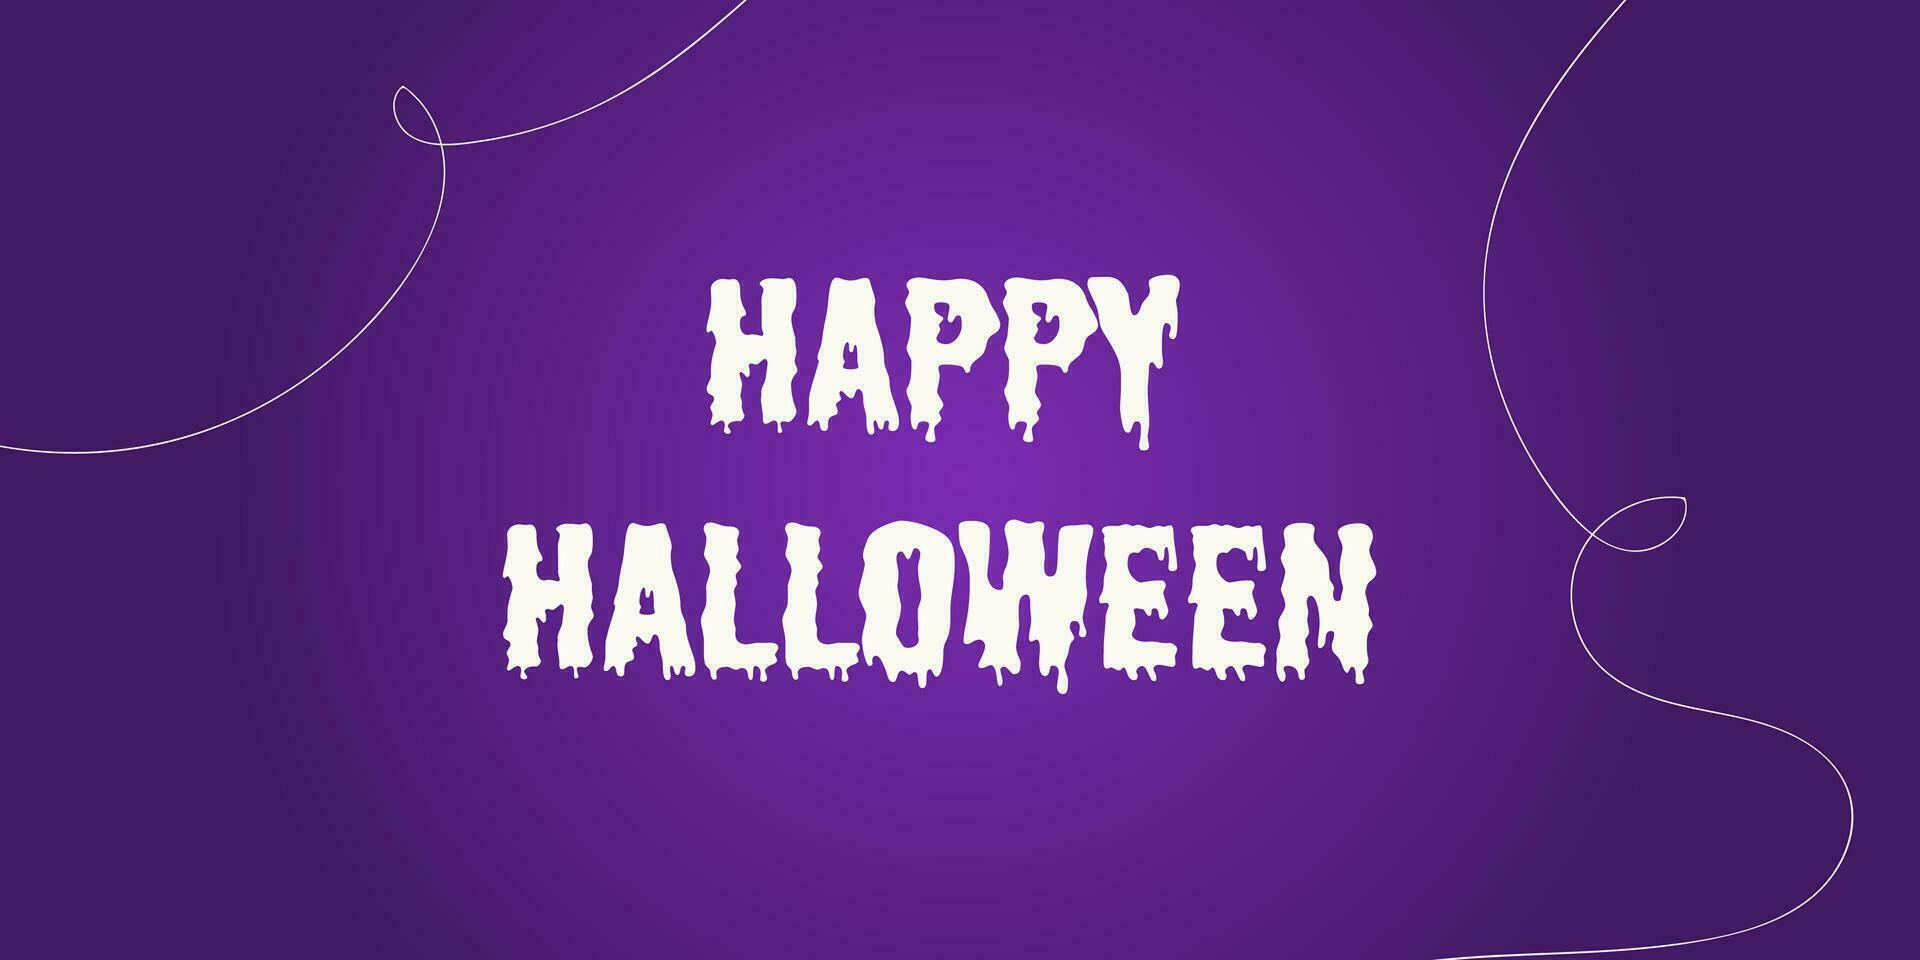 Happy Halloween Horror text on treat or trick fantasy fun party celebration purple background design. vector